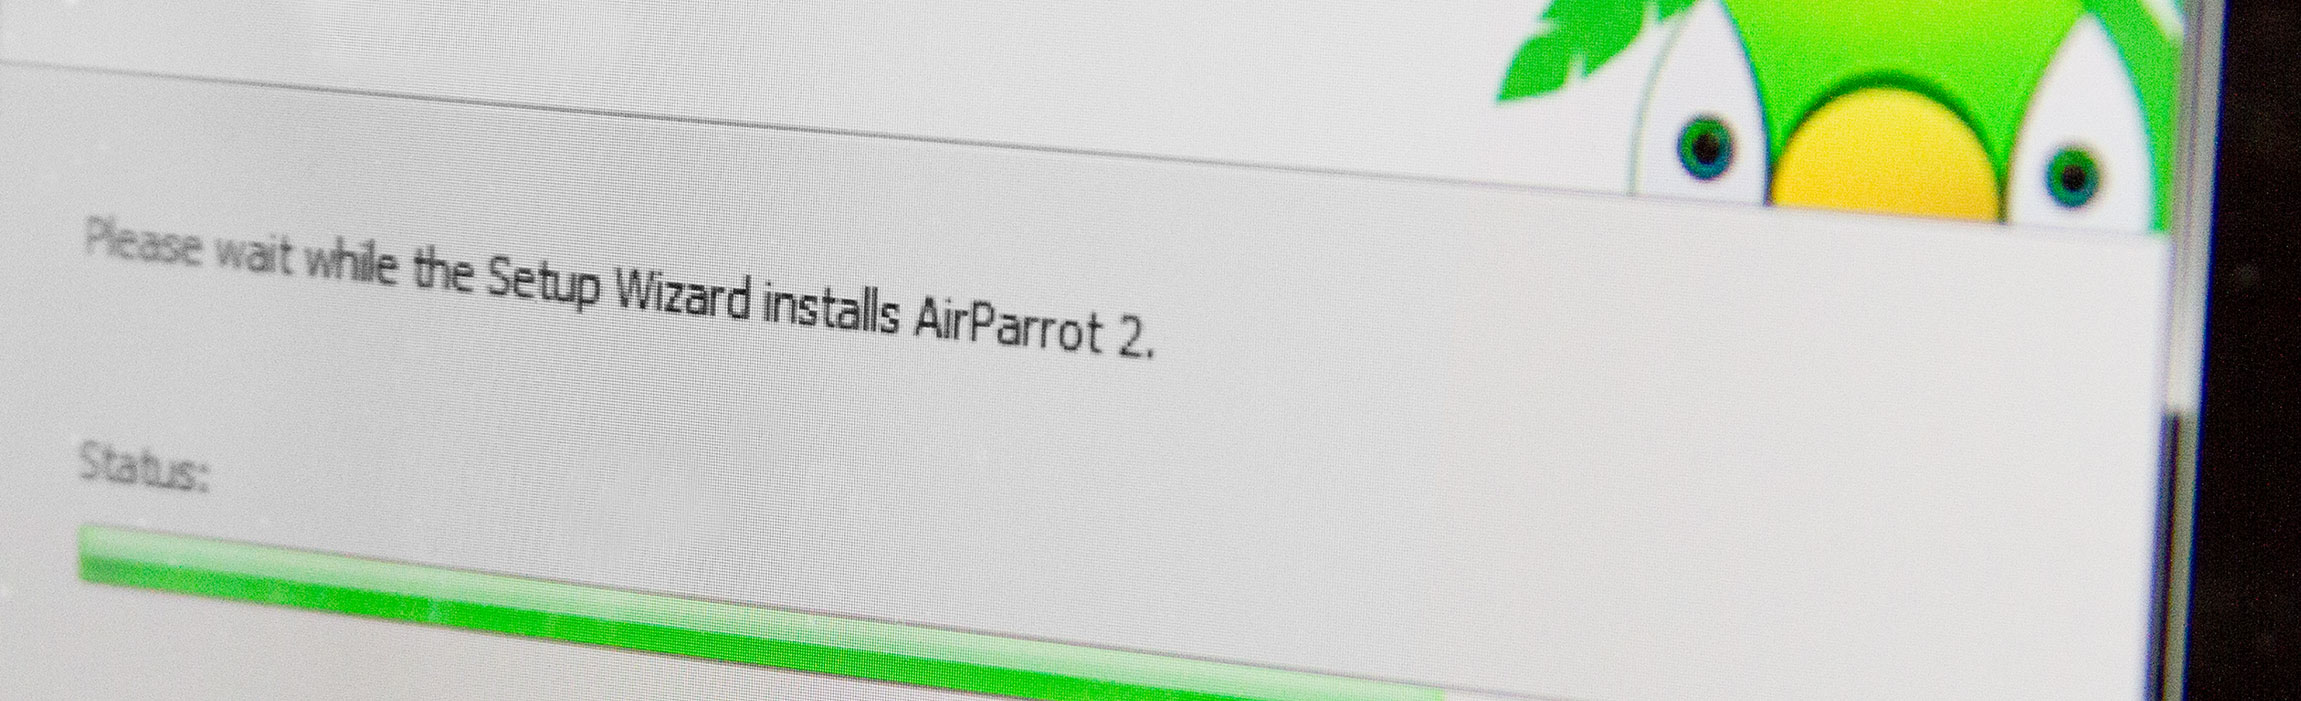 airparrot 2 has stopped working